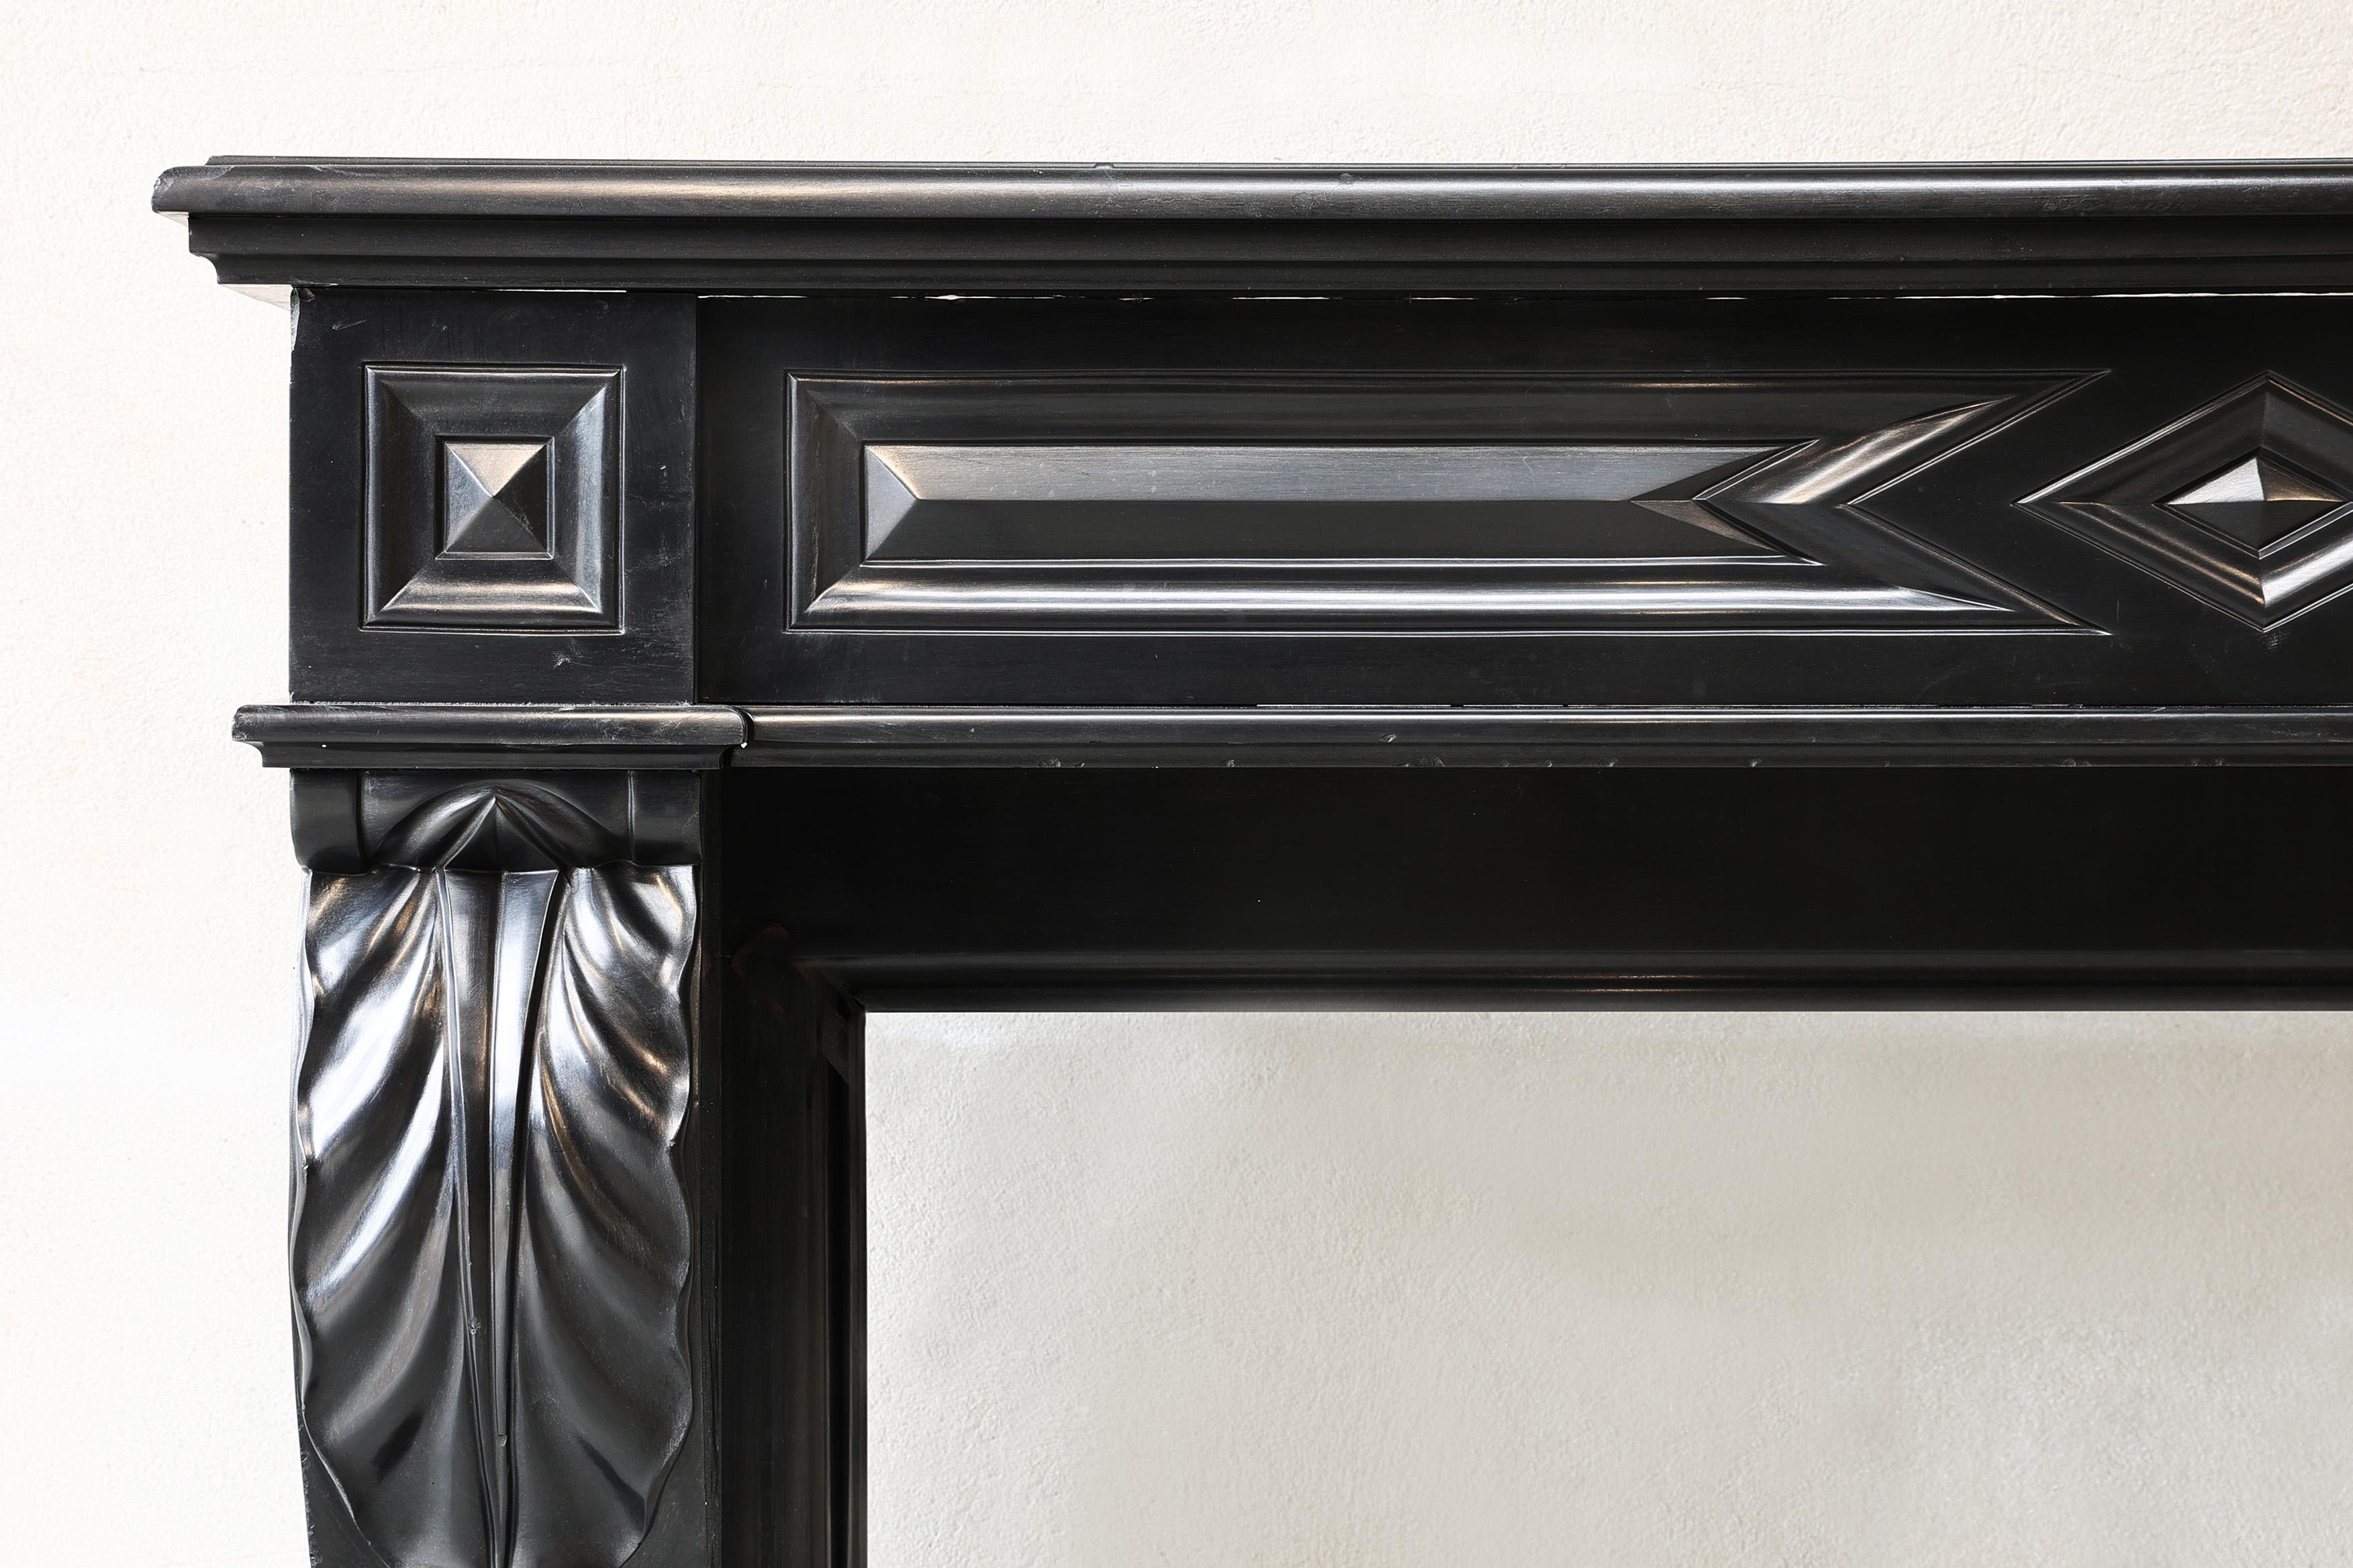 19th Century 19th century fireplace in style of Louis XVI of Noir de Mazy marble For Sale